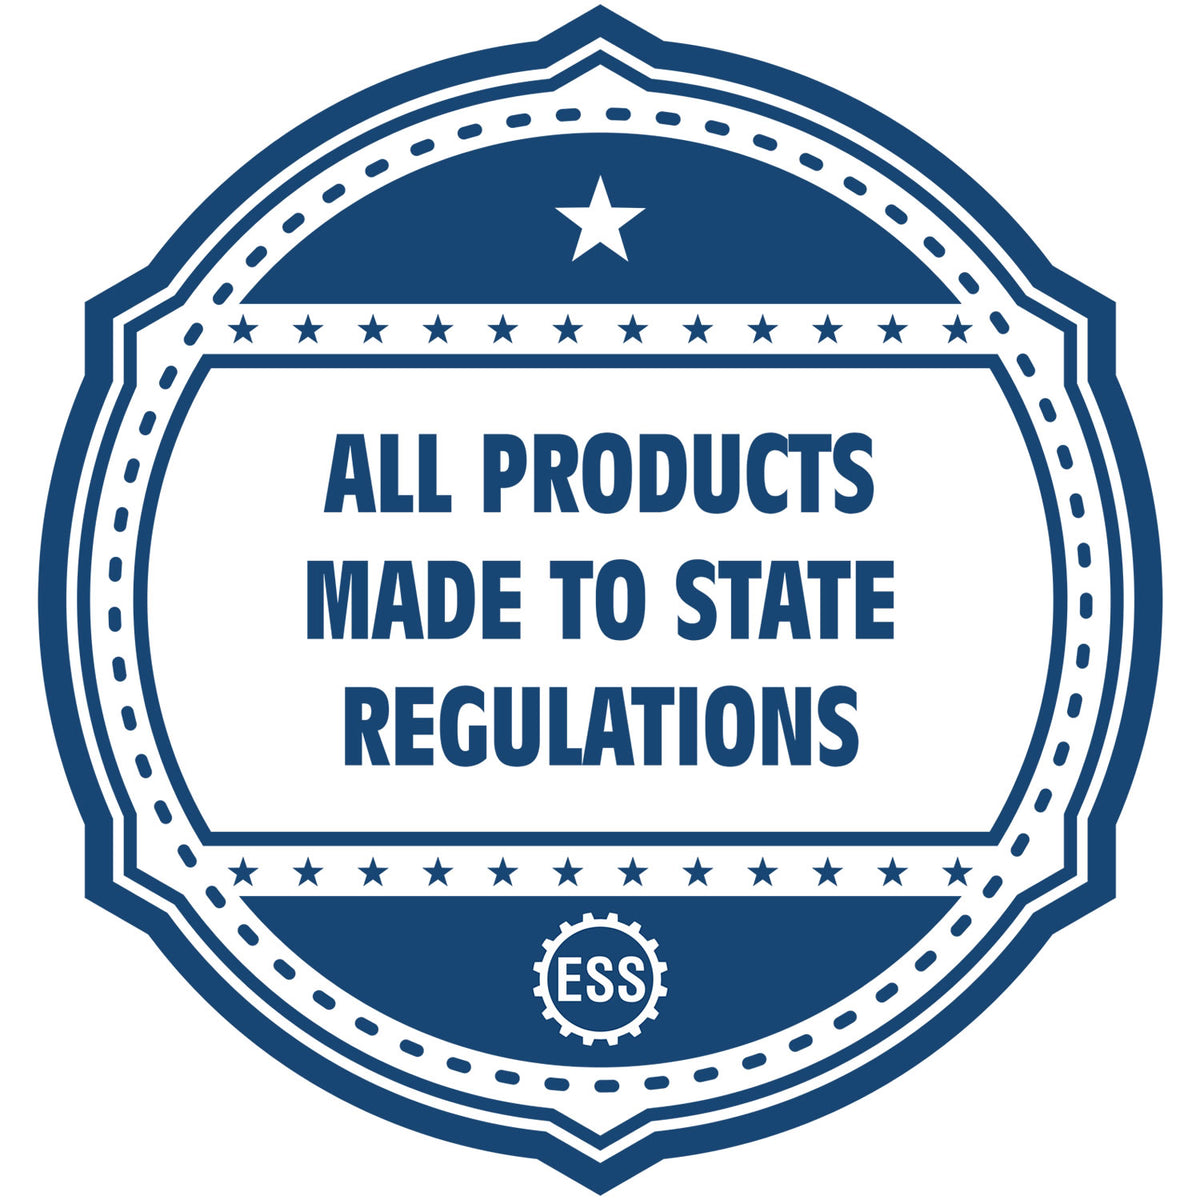 A blue icon or badge for the Utah Professional Geologist Seal Stamp showing that this product is made in compliance with state regulations.